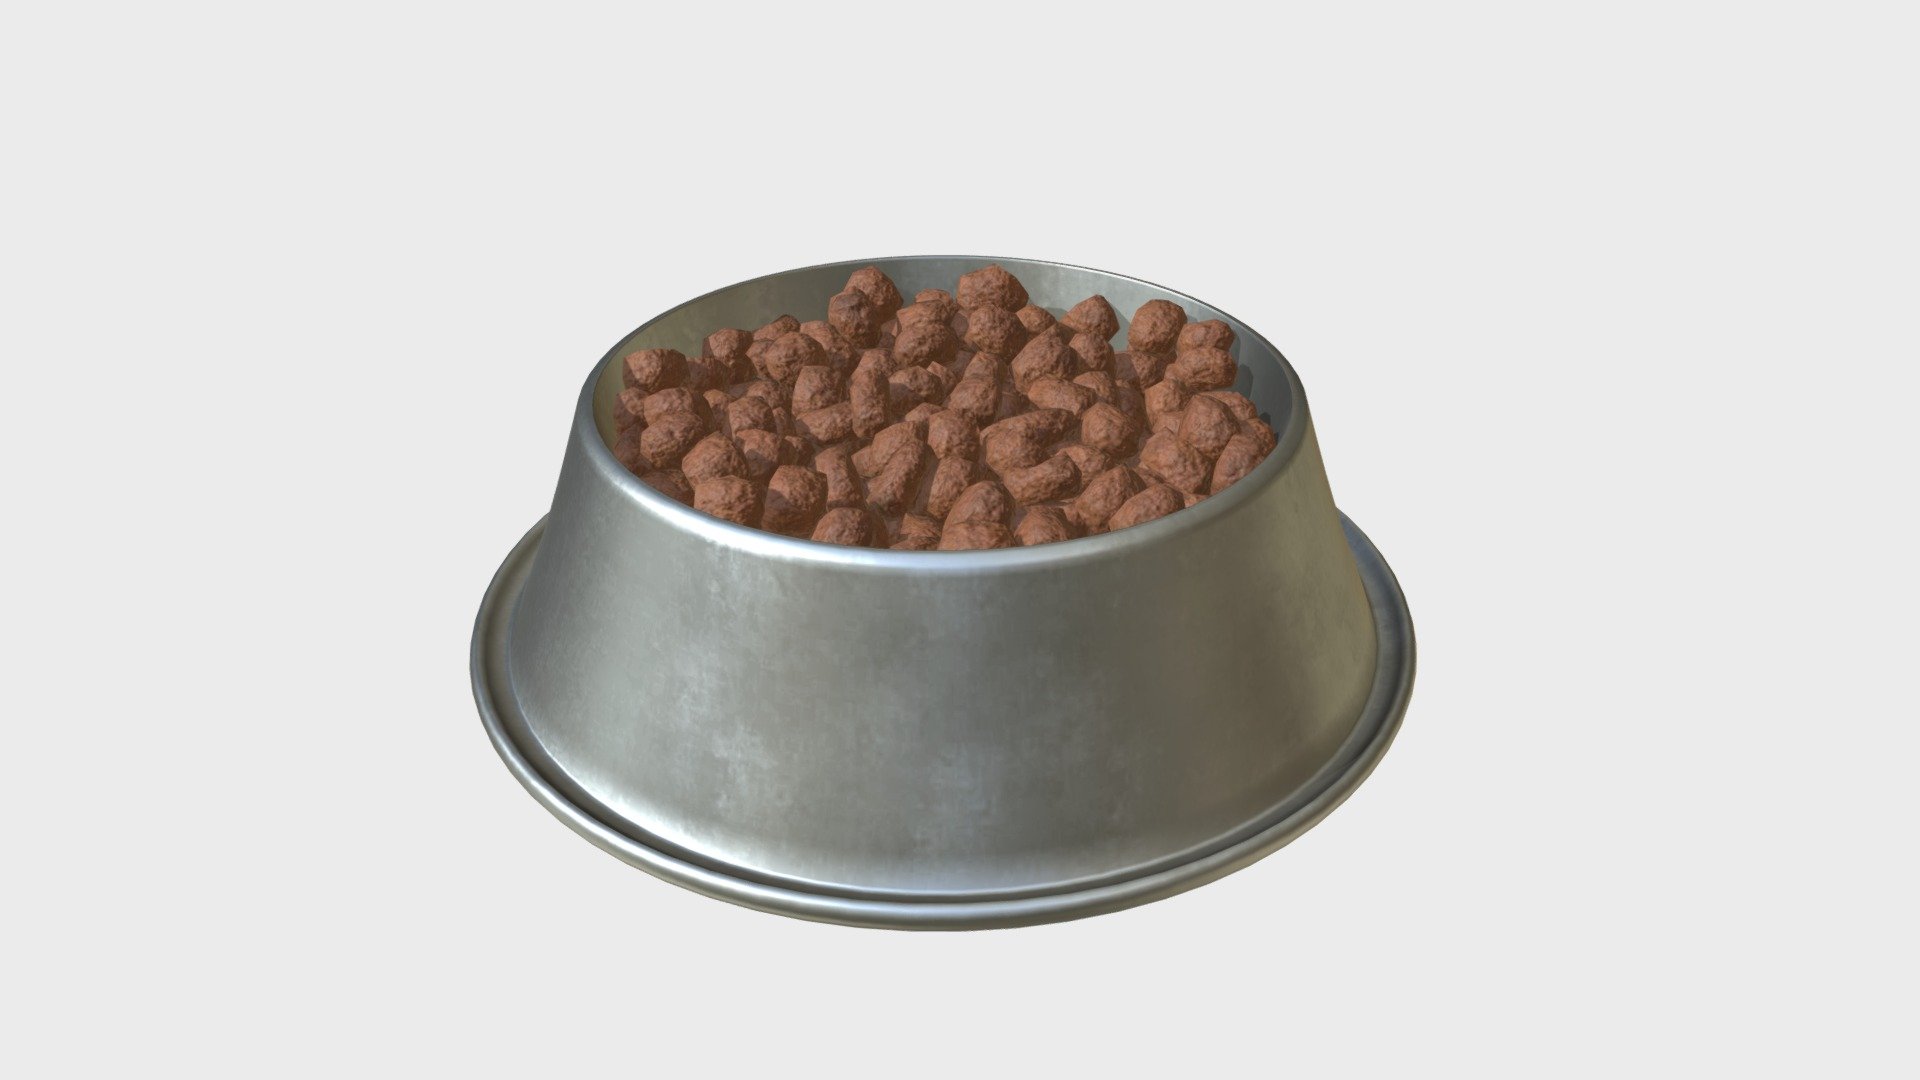 === The following description refers to the additional ZIP package provided with this model ===

Dog bowl with food 3D Model. 2 individual objects (bowl, food), each one with its own non overlapping UV Layout map, Material and PBR Textures set. Production-ready 3D Model, with PBR materials, textures, non overlapping UV Layout map provided in the package.

Quads only geometries (no tris/ngons).

Formats included: FBX, OBJ; scenes: BLEND (with Cycles / Eevee PBR Materials and Textures); other: 16-bit PNGs with Alpha.

2 Objects (meshes), 2 PBR Materials, UV unwrapped (non overlapping UV Layout map provided in the package); UV-mapped Textures.

UV Layout maps and Image Textures resolutions: 2048x2048; PBR Textures made with Substance Painter.

Polygonal, QUADS ONLY (no tris/ngons); 14536 vertices, 13704 quad faces (27408 tris).

Real world dimensions; scene scale units: cm in Blender 3.3 (that is: Metric with 0.01 scale).

Uniform scale object (scale applied in Blender 3.3) 3d model